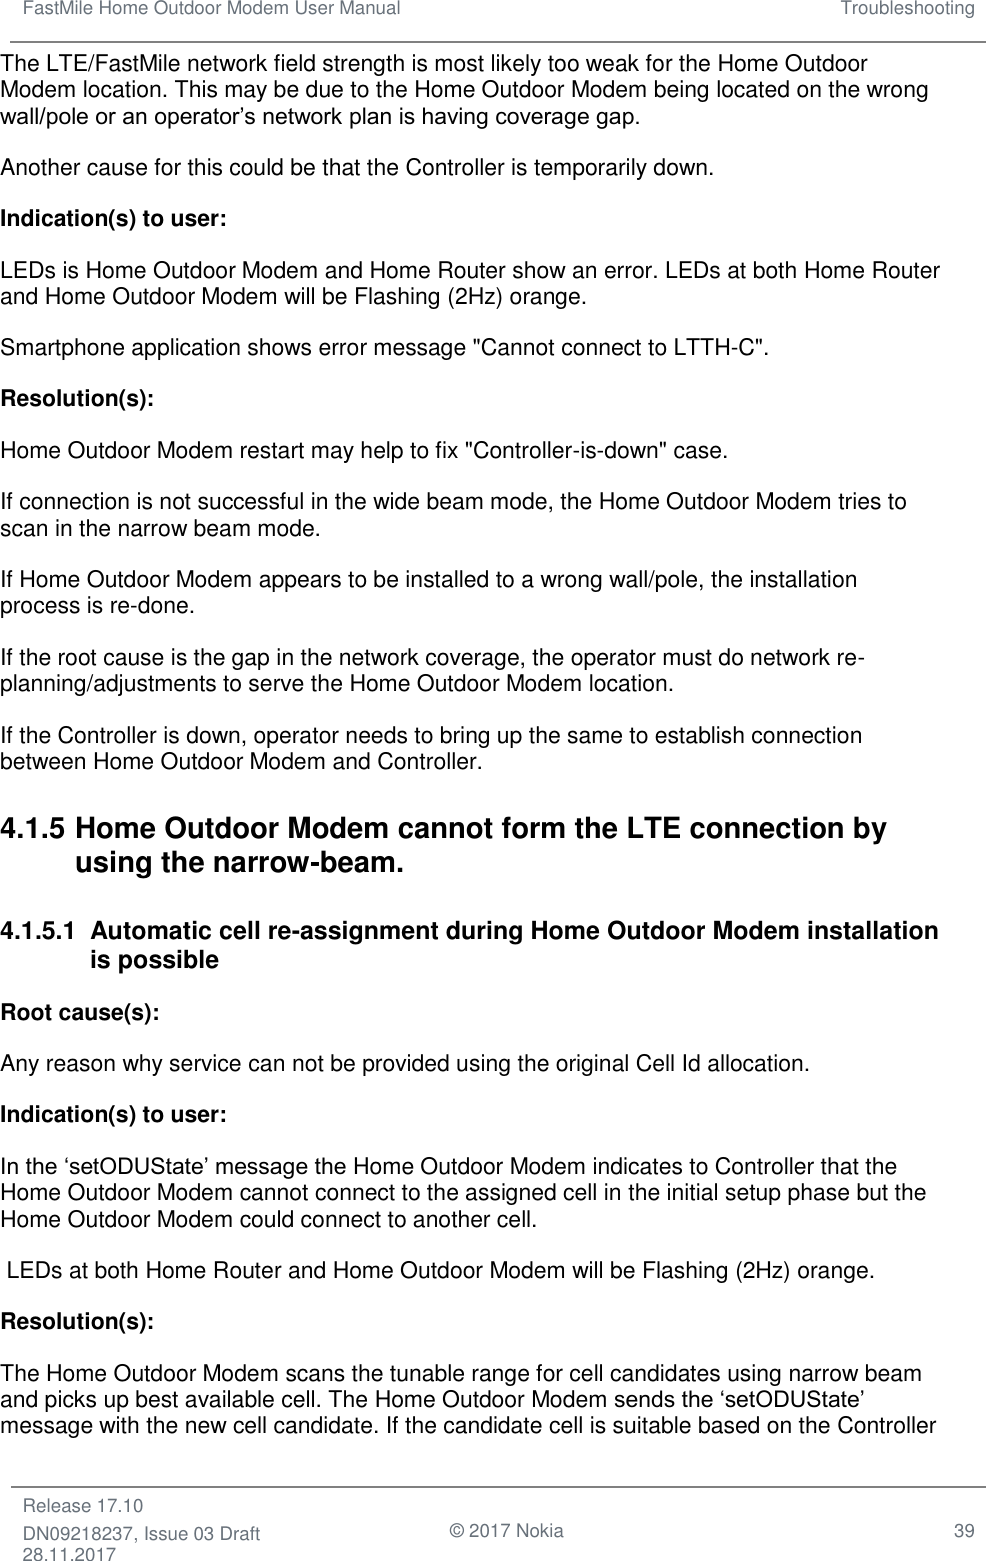 FastMile Home Outdoor Modem User Manual Troubleshooting  Release 17.10 DN09218237, Issue 03 Draft 28.11.2017                                © 2017 Nokia 39  The LTE/FastMile network field strength is most likely too weak for the Home Outdoor Modem location. This may be due to the Home Outdoor Modem being located on the wrong wall/pole or an operator’s network plan is having coverage gap. Another cause for this could be that the Controller is temporarily down.  Indication(s) to user:  LEDs is Home Outdoor Modem and Home Router show an error. LEDs at both Home Router and Home Outdoor Modem will be Flashing (2Hz) orange. Smartphone application shows error message &quot;Cannot connect to LTTH-C&quot;. Resolution(s):  Home Outdoor Modem restart may help to fix &quot;Controller-is-down&quot; case. If connection is not successful in the wide beam mode, the Home Outdoor Modem tries to scan in the narrow beam mode.  If Home Outdoor Modem appears to be installed to a wrong wall/pole, the installation process is re-done.  If the root cause is the gap in the network coverage, the operator must do network re-planning/adjustments to serve the Home Outdoor Modem location.  If the Controller is down, operator needs to bring up the same to establish connection between Home Outdoor Modem and Controller. 4.1.5 Home Outdoor Modem cannot form the LTE connection by using the narrow-beam.  4.1.5.1  Automatic cell re-assignment during Home Outdoor Modem installation is possible Root cause(s):  Any reason why service can not be provided using the original Cell Id allocation. Indication(s) to user:  In the ‘setODUState’ message the Home Outdoor Modem indicates to Controller that the Home Outdoor Modem cannot connect to the assigned cell in the initial setup phase but the Home Outdoor Modem could connect to another cell.  LEDs at both Home Router and Home Outdoor Modem will be Flashing (2Hz) orange. Resolution(s): The Home Outdoor Modem scans the tunable range for cell candidates using narrow beam and picks up best available cell. The Home Outdoor Modem sends the ‘setODUState’ message with the new cell candidate. If the candidate cell is suitable based on the Controller 